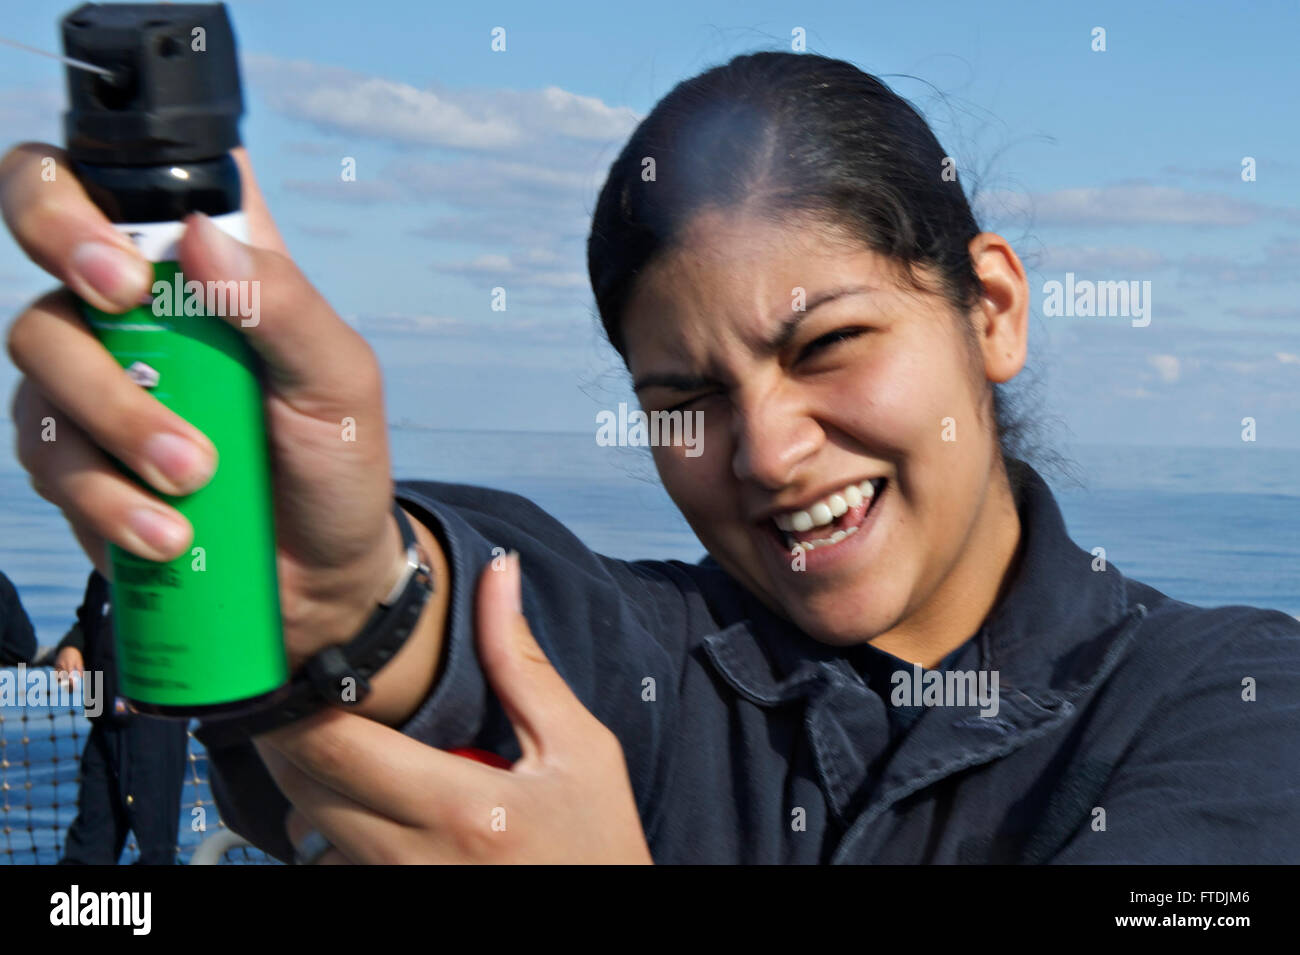 151209-N-FP878-377 MEDITERRANEAN SEA (Dec. 9, 2015) Seaman Lisette Longoria from San Antonio, Texas, sprays inert practice OC pepper spray during security forces sentry training aboard USS Carney (DDG 64) Dec. 9, 2015. Carney, an Arleigh Burke-class guided missile destroyer, forward deployed to Rota, Spain, is conducting a routine patrol in the U. S. 6th Fleet area of operations in support of U.S. national security interests in Europe. (U.S. Navy photo by Mass Communication Specialist 1st Class Theron J. Godbold/Released) Stock Photo